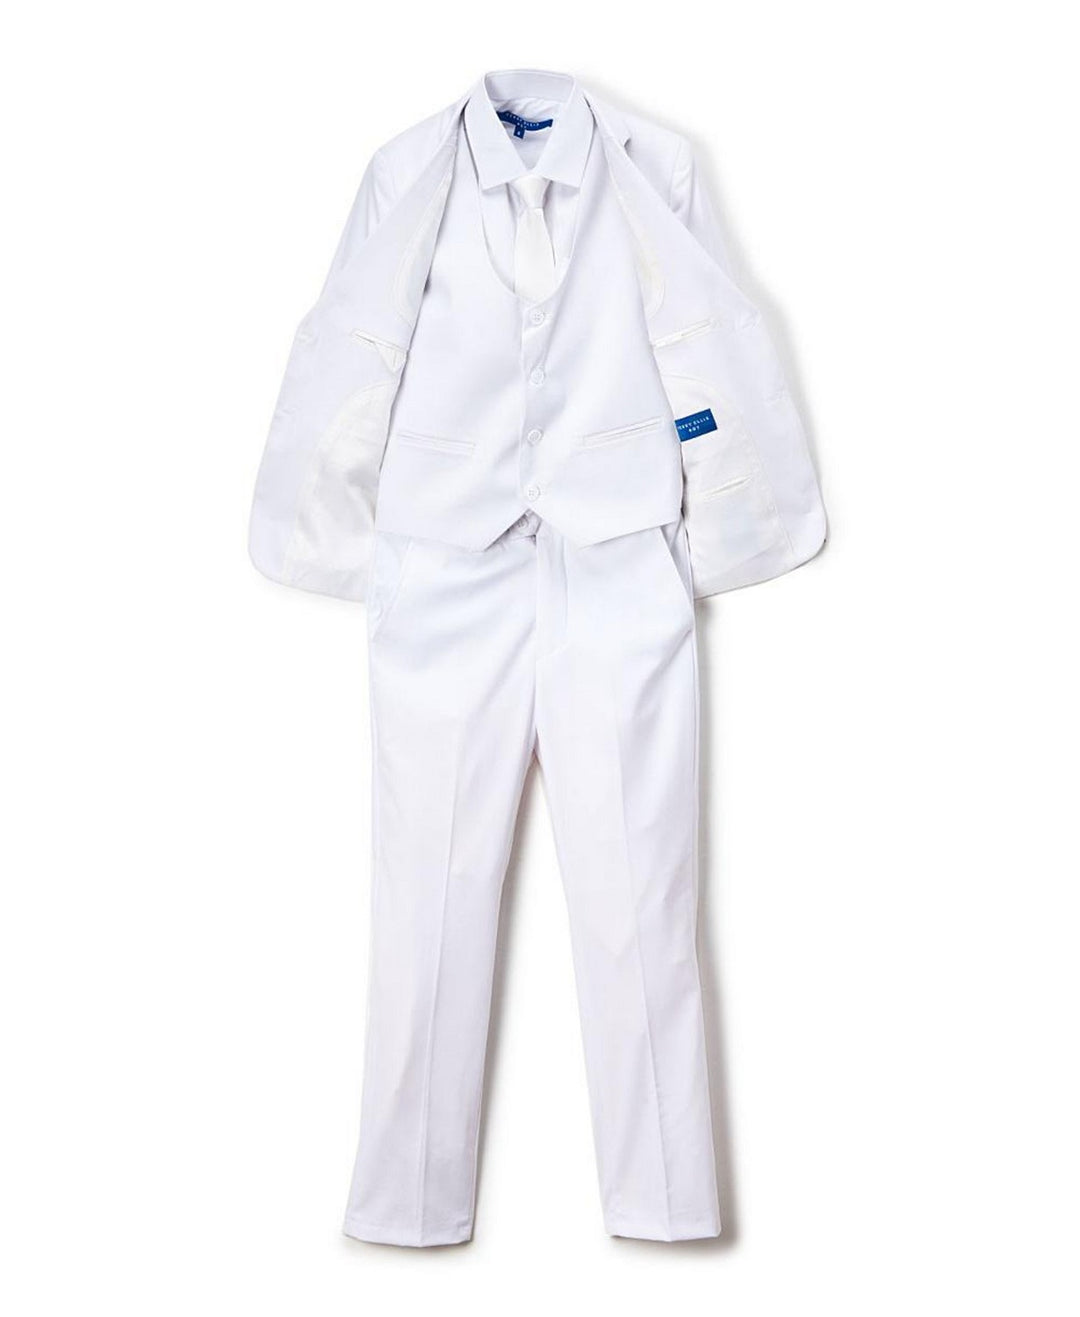 New York Man White Boys Communion 5 Piece Suit by Perry Ellis - New York Man Suits